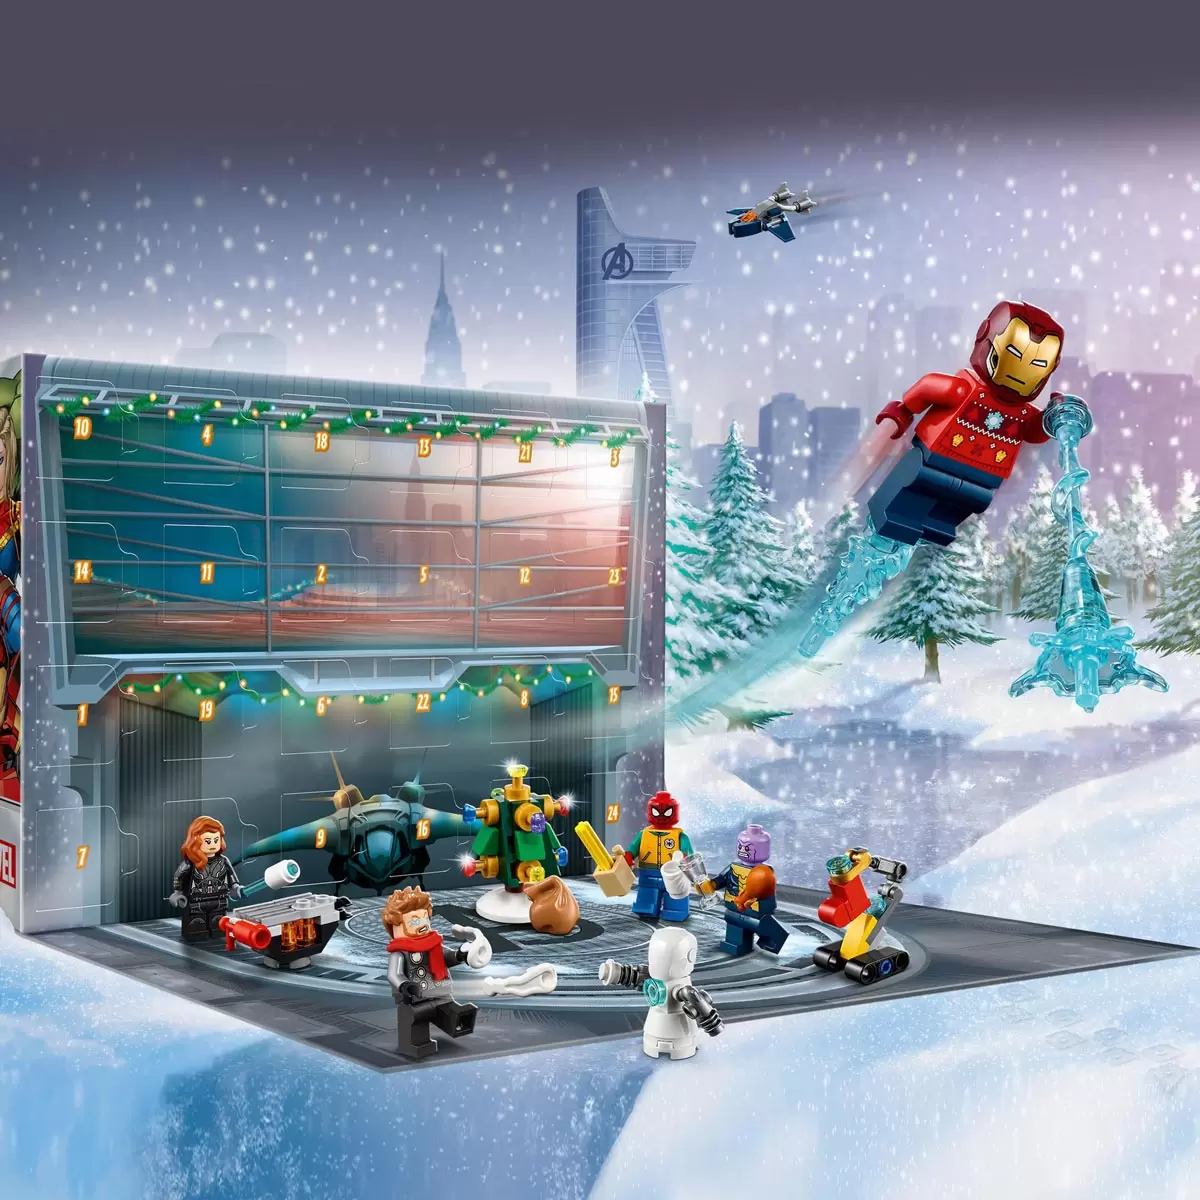 Buy LEGO The Avengers Advent Calendar Features3 Image at Costco.co.uk